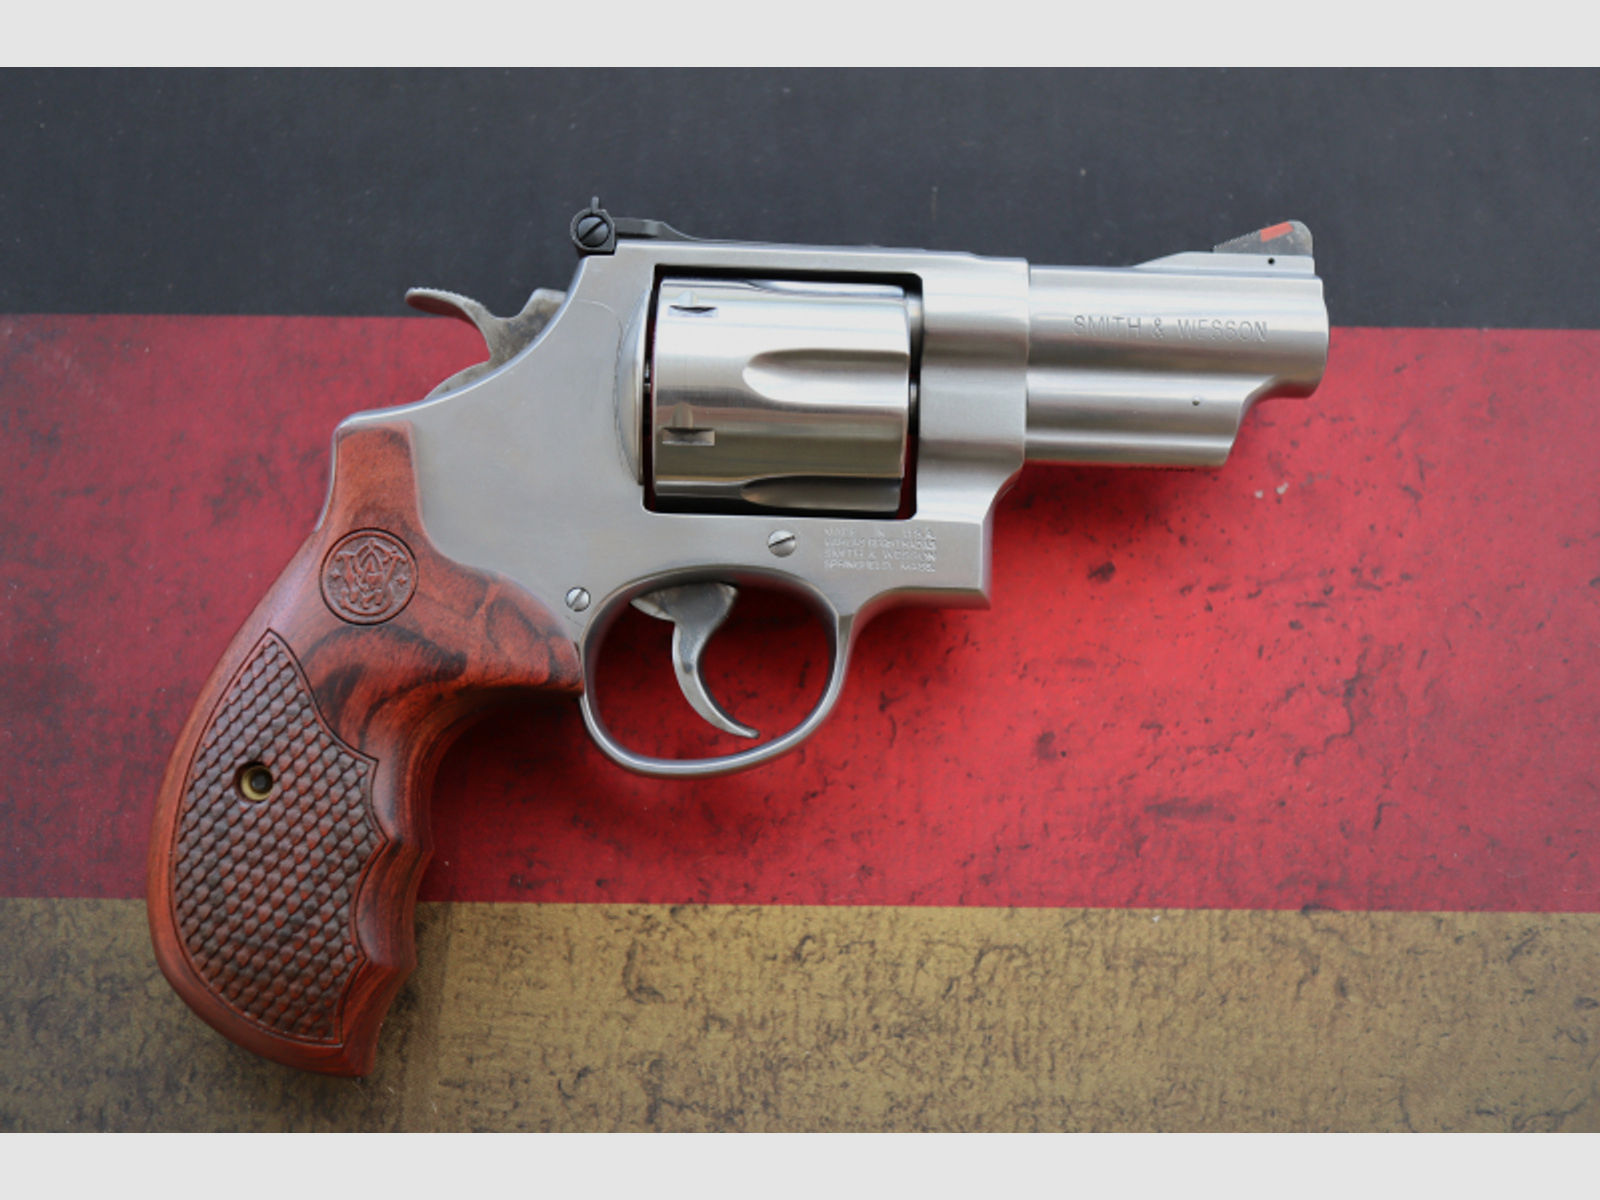 Neuwaffe Smith & Wesson Modell 629 Deluxe Kaliber .44 RemMag